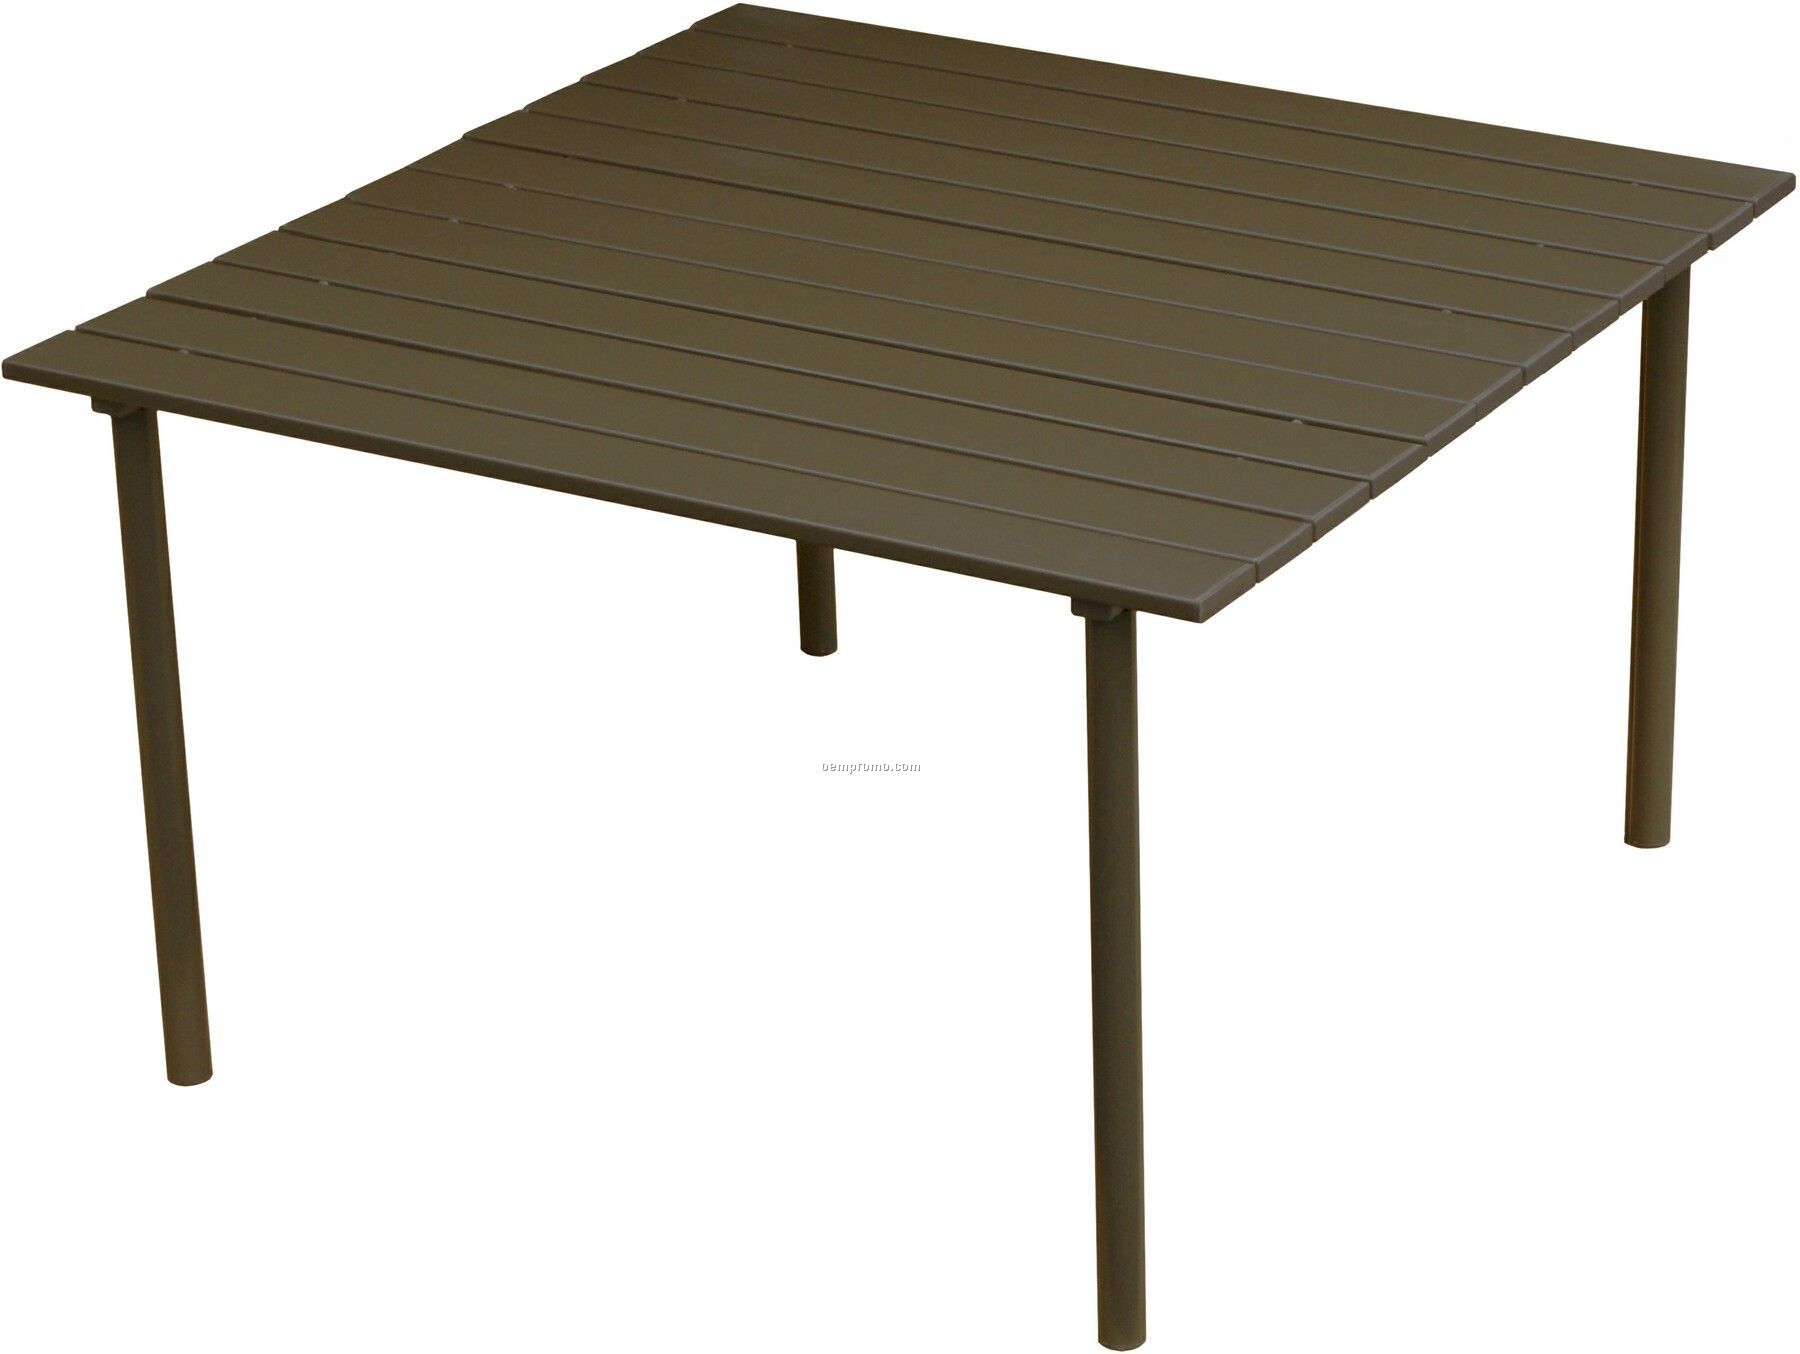 Collapsible Folding Low Brown Aluminum Table With Black Carry Bag